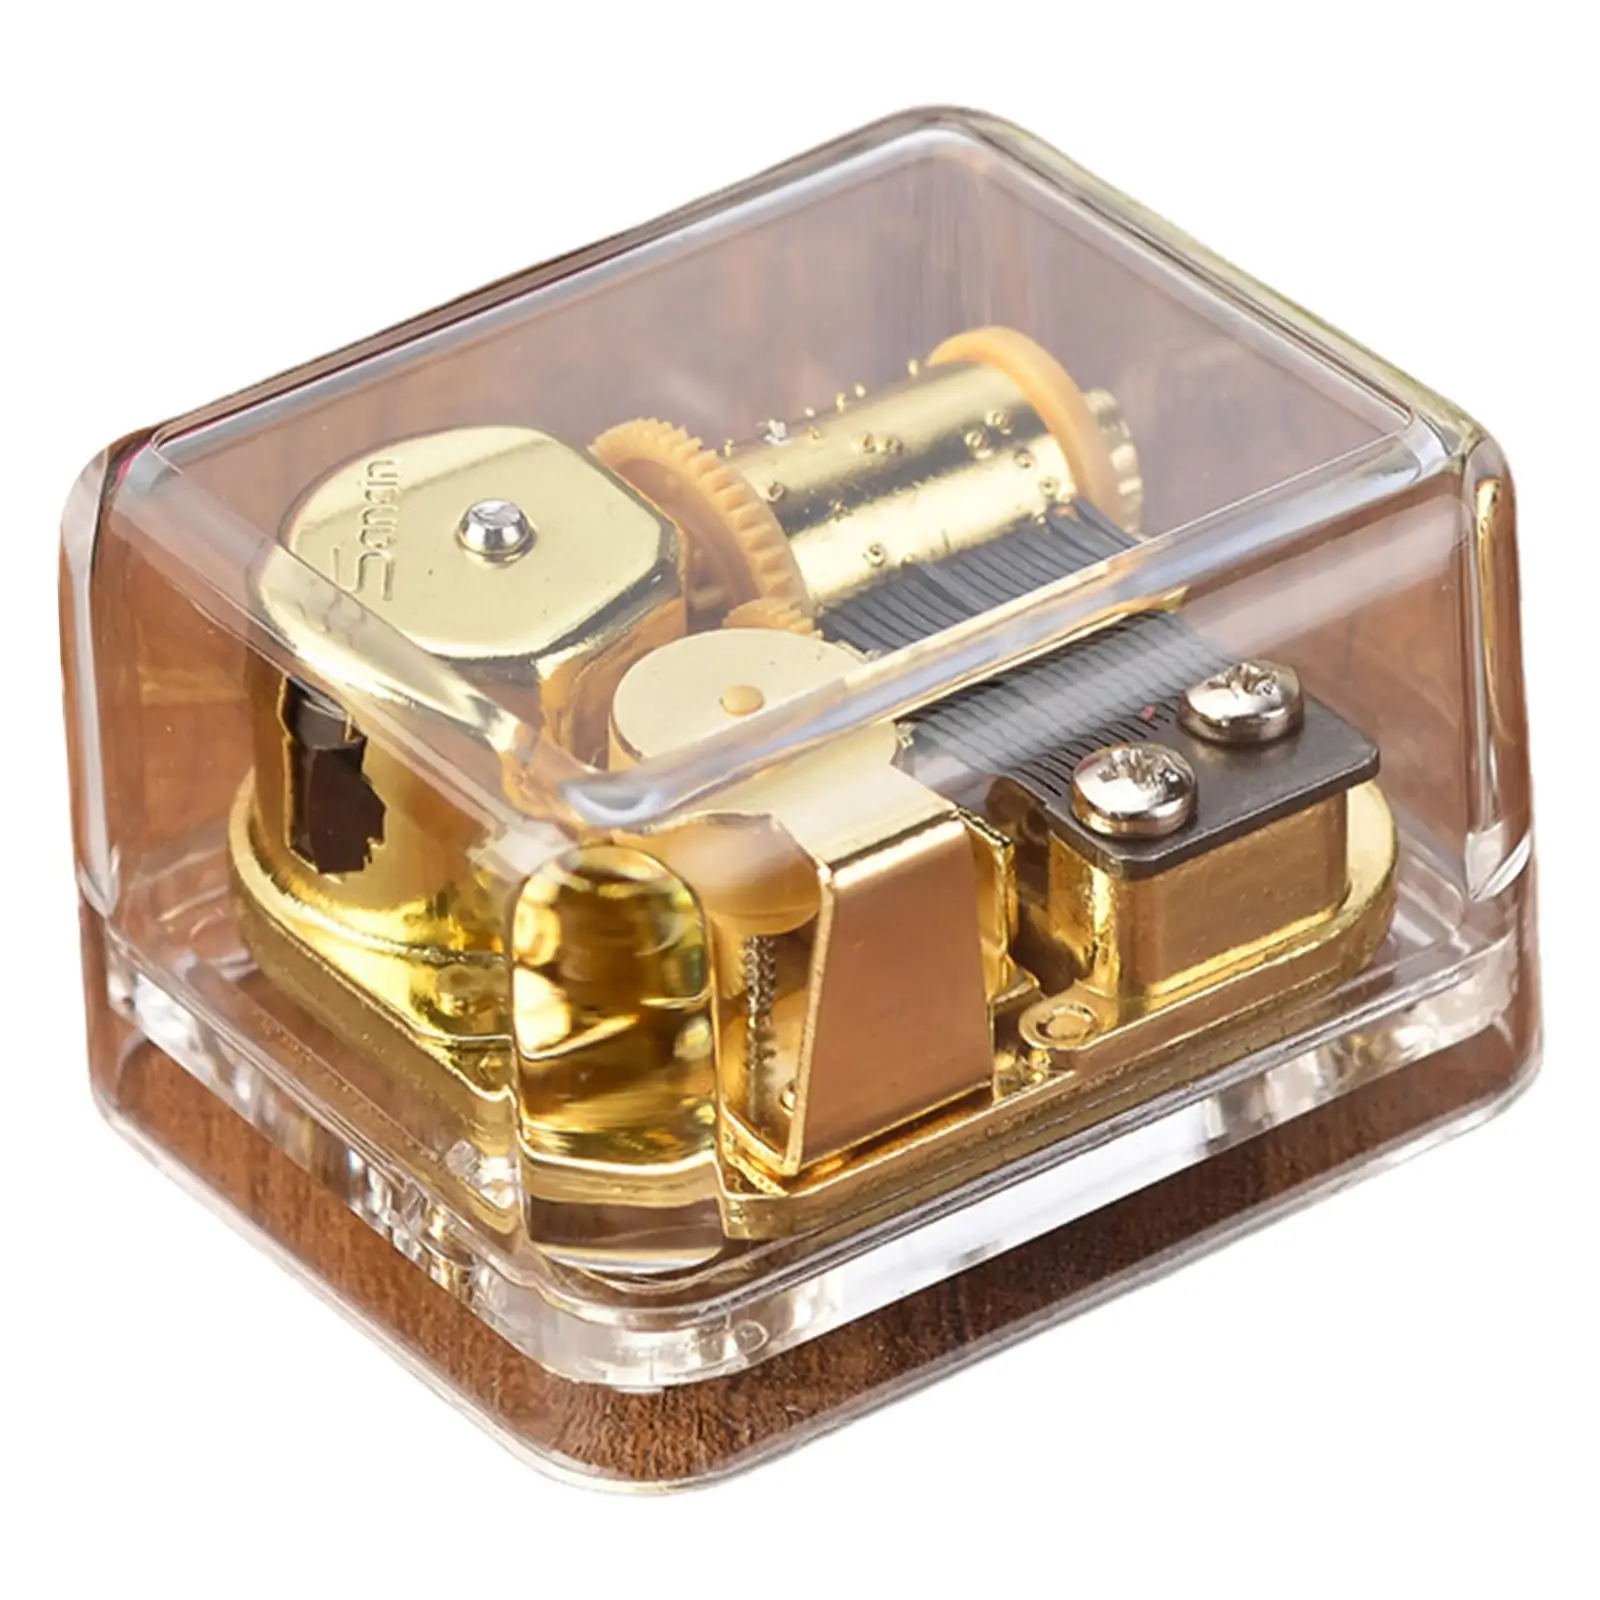 Unique Music Box Acrylic Wind up Transparent Mechanism with Gold Plating Movement in for Birthday Friends images - 6